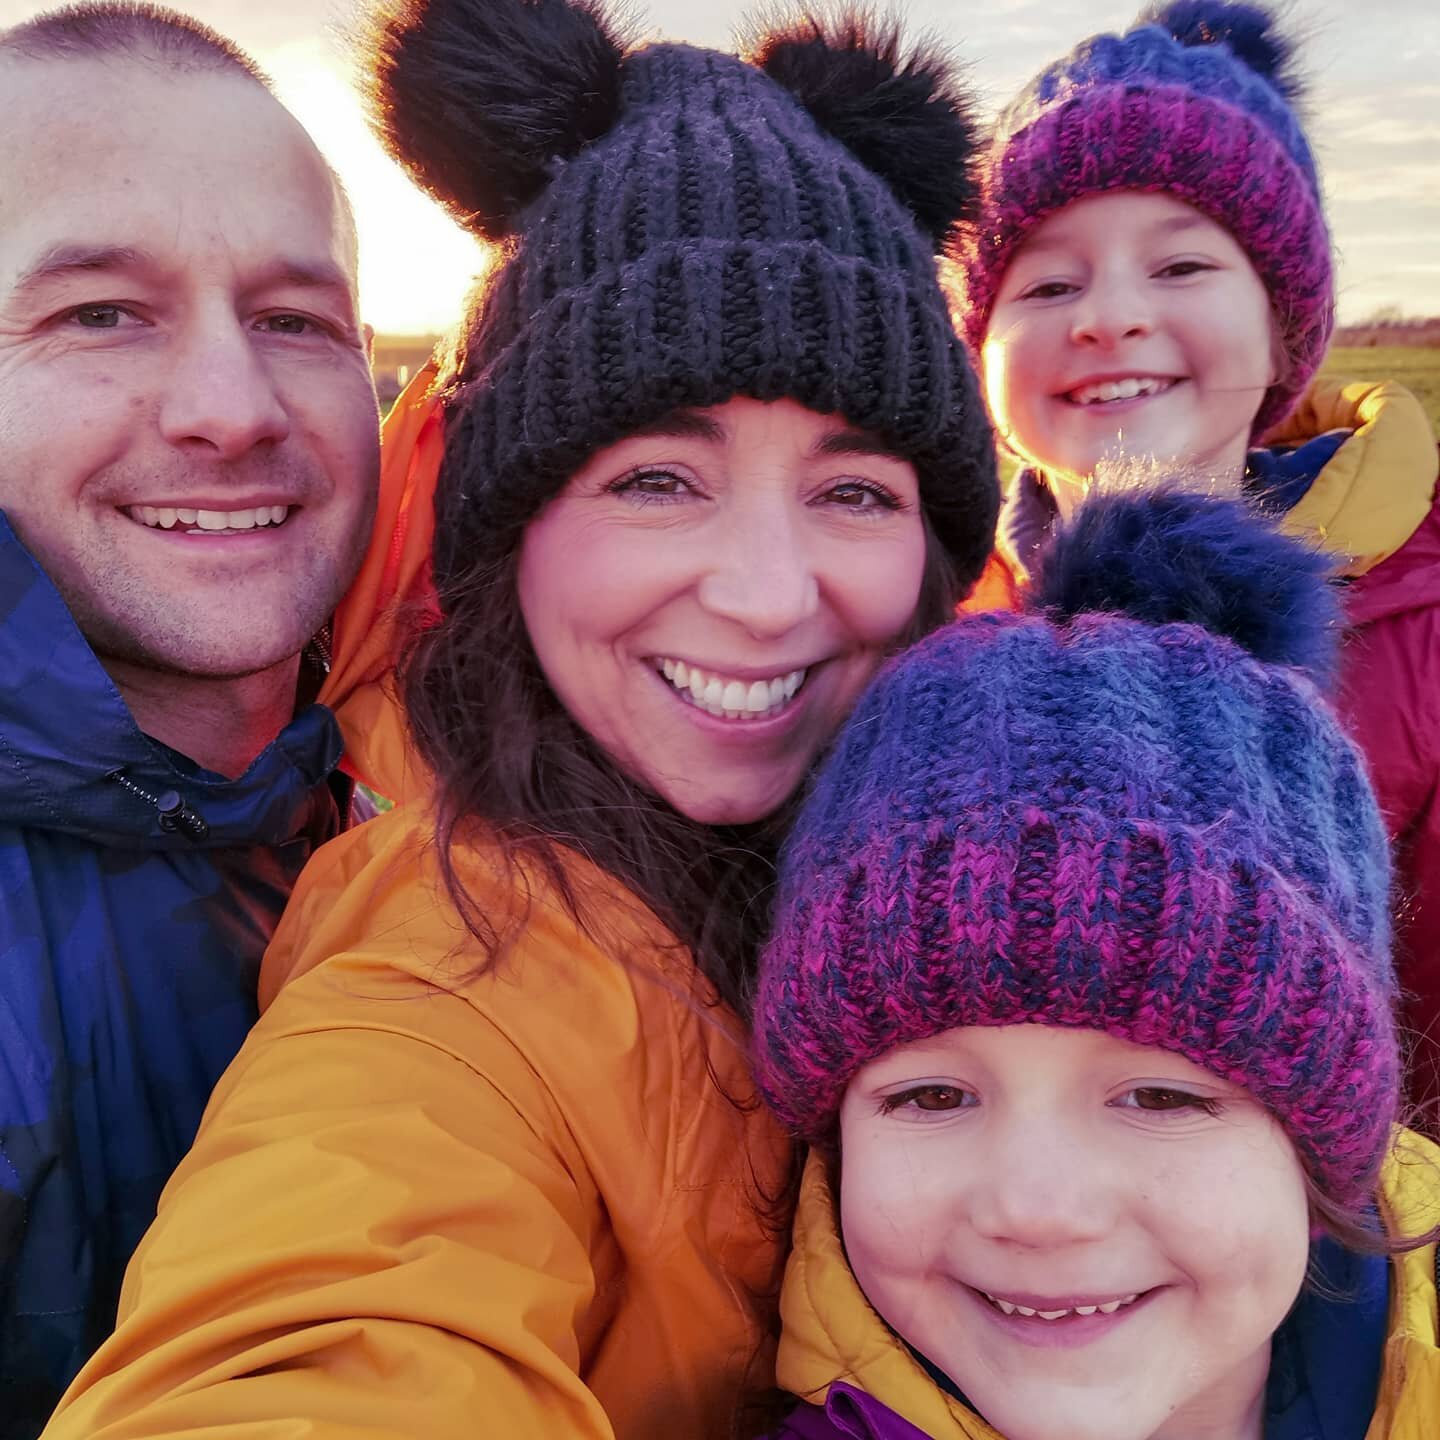 Hello Instagram 👋 ..... We have had a fabulous influx of new followers since the summer and I wanted to show our faces instead of just the campervan 😜 
We are Amy, Dan, Sienna (8), Savannah (6) and Luna, the crazy Cockapoo who completes our family 